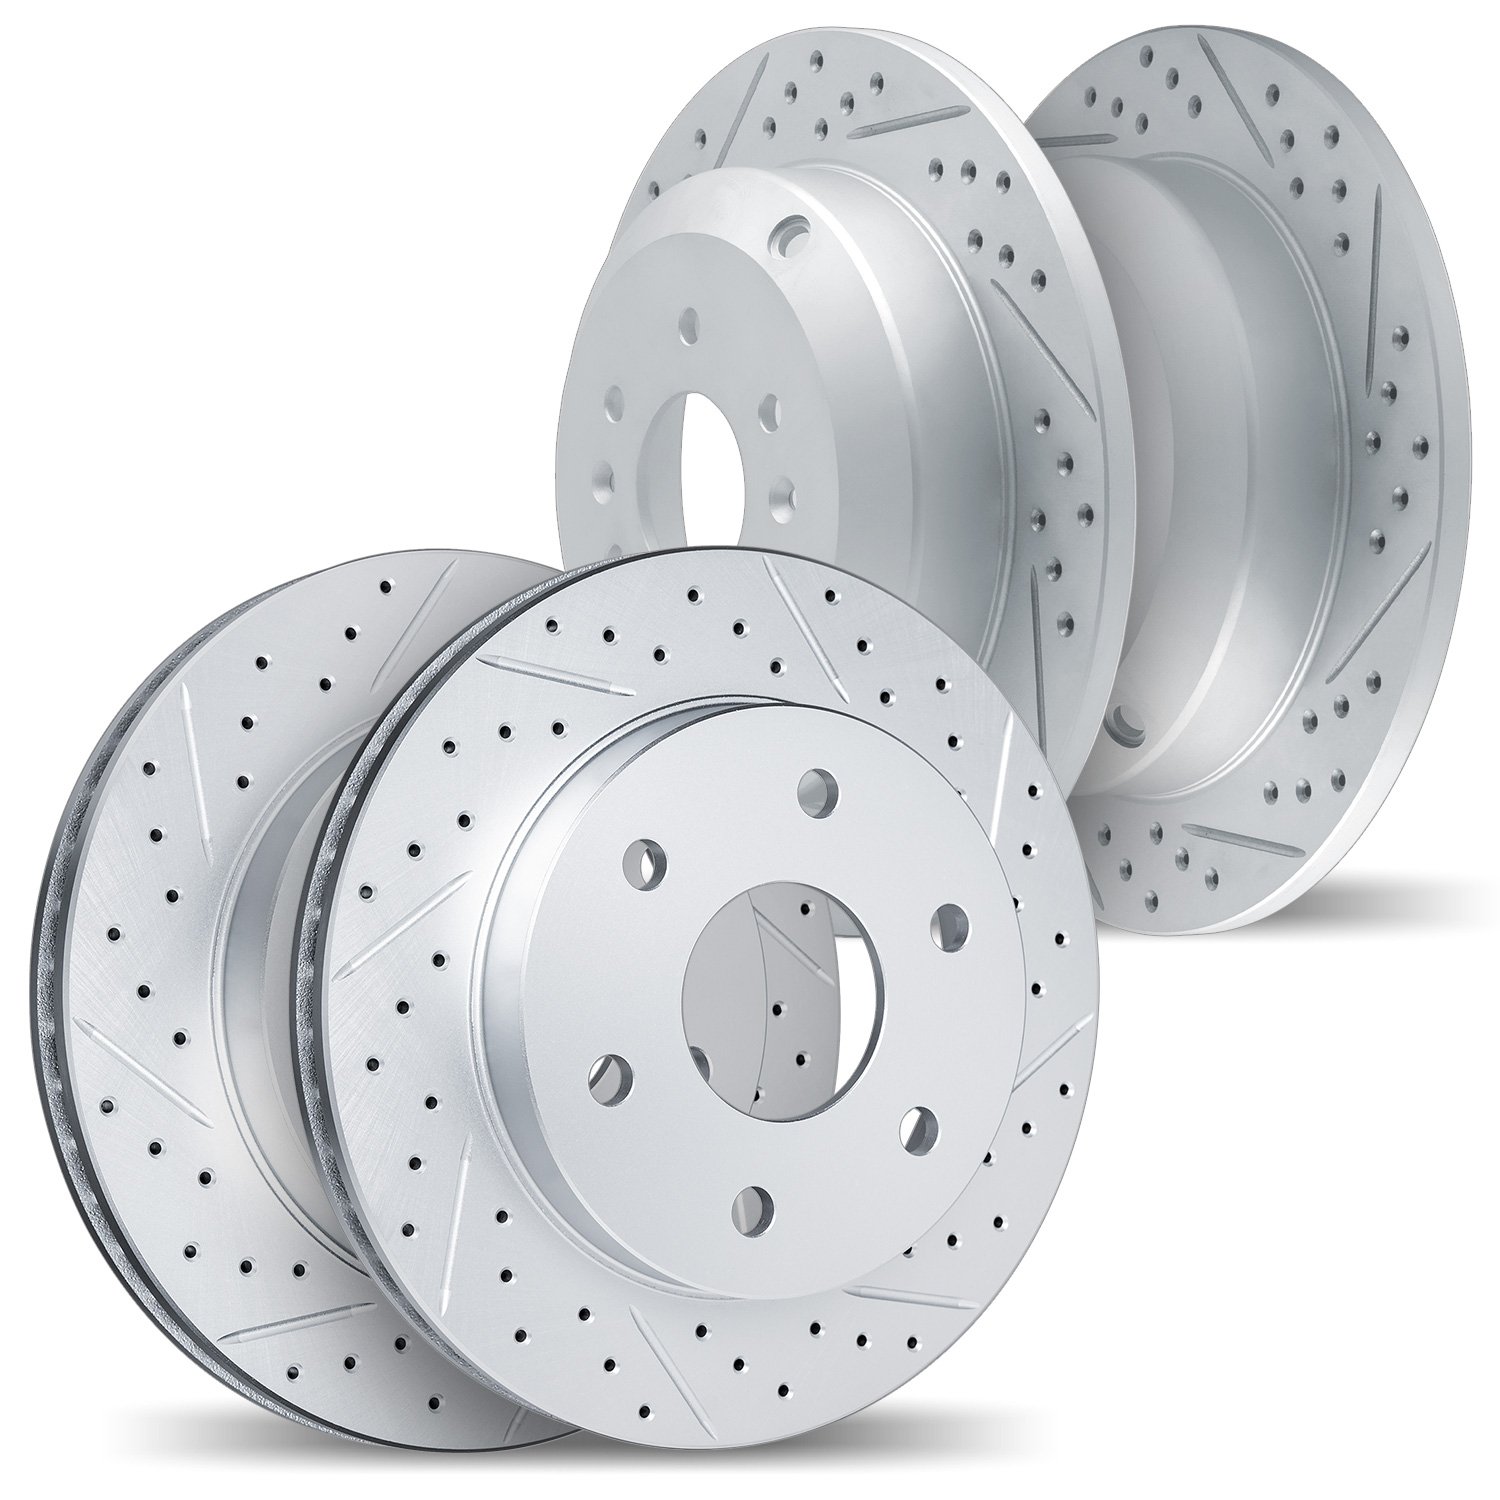 2004-40056 Geoperformance Drilled/Slotted Brake Rotors, 2007-2018 Multiple Makes/Models, Position: Front and Rear